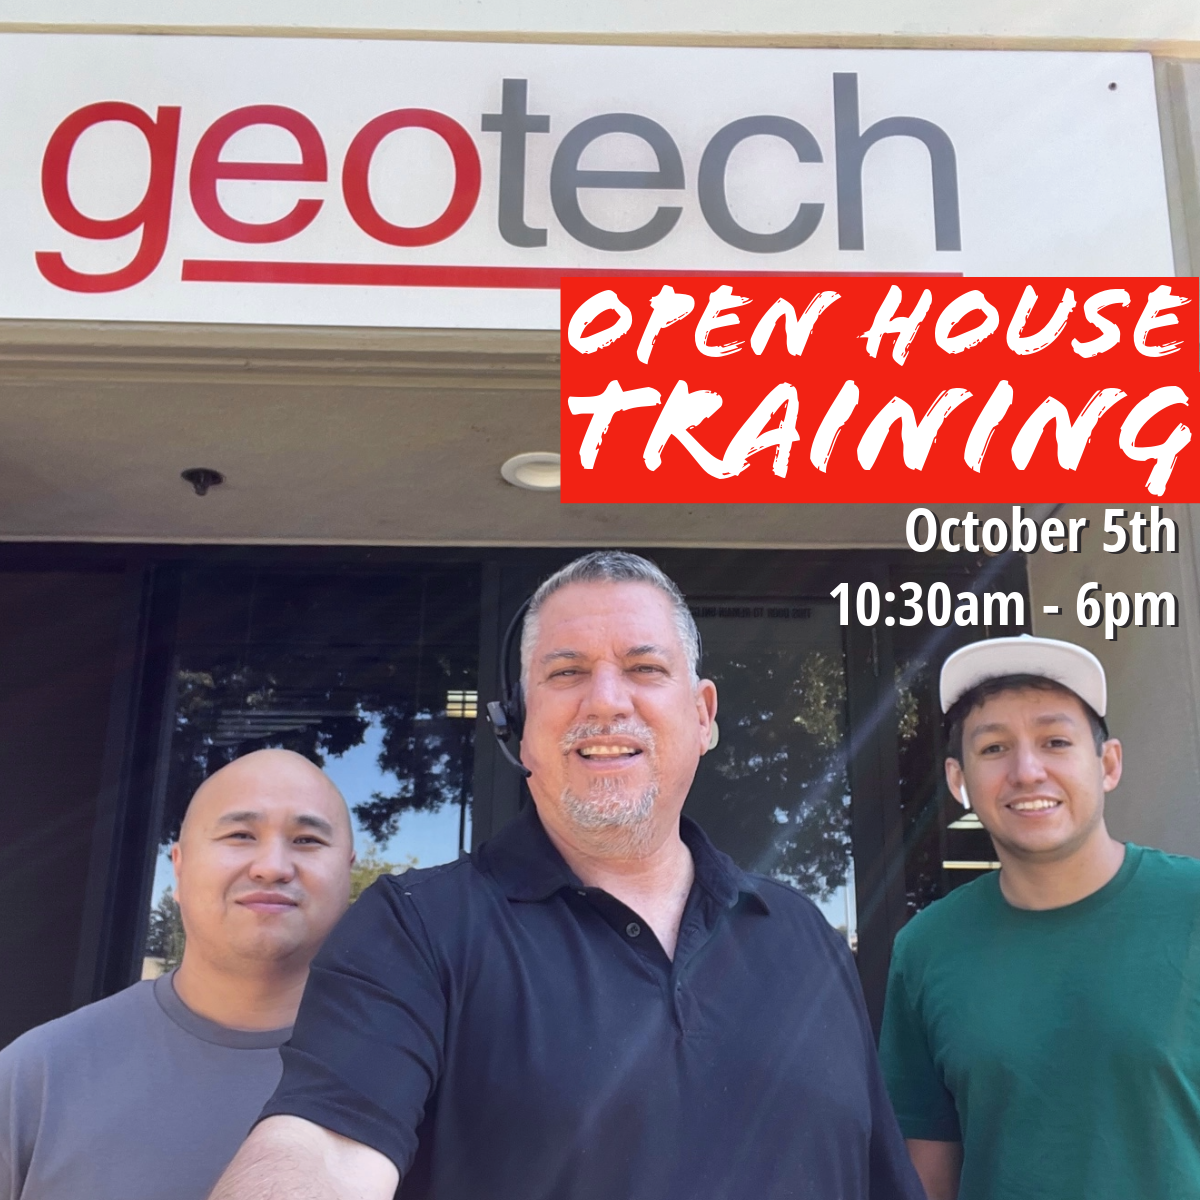 Sacramento Geotech Team standing outside Geotech building with Geotech Sign in background.